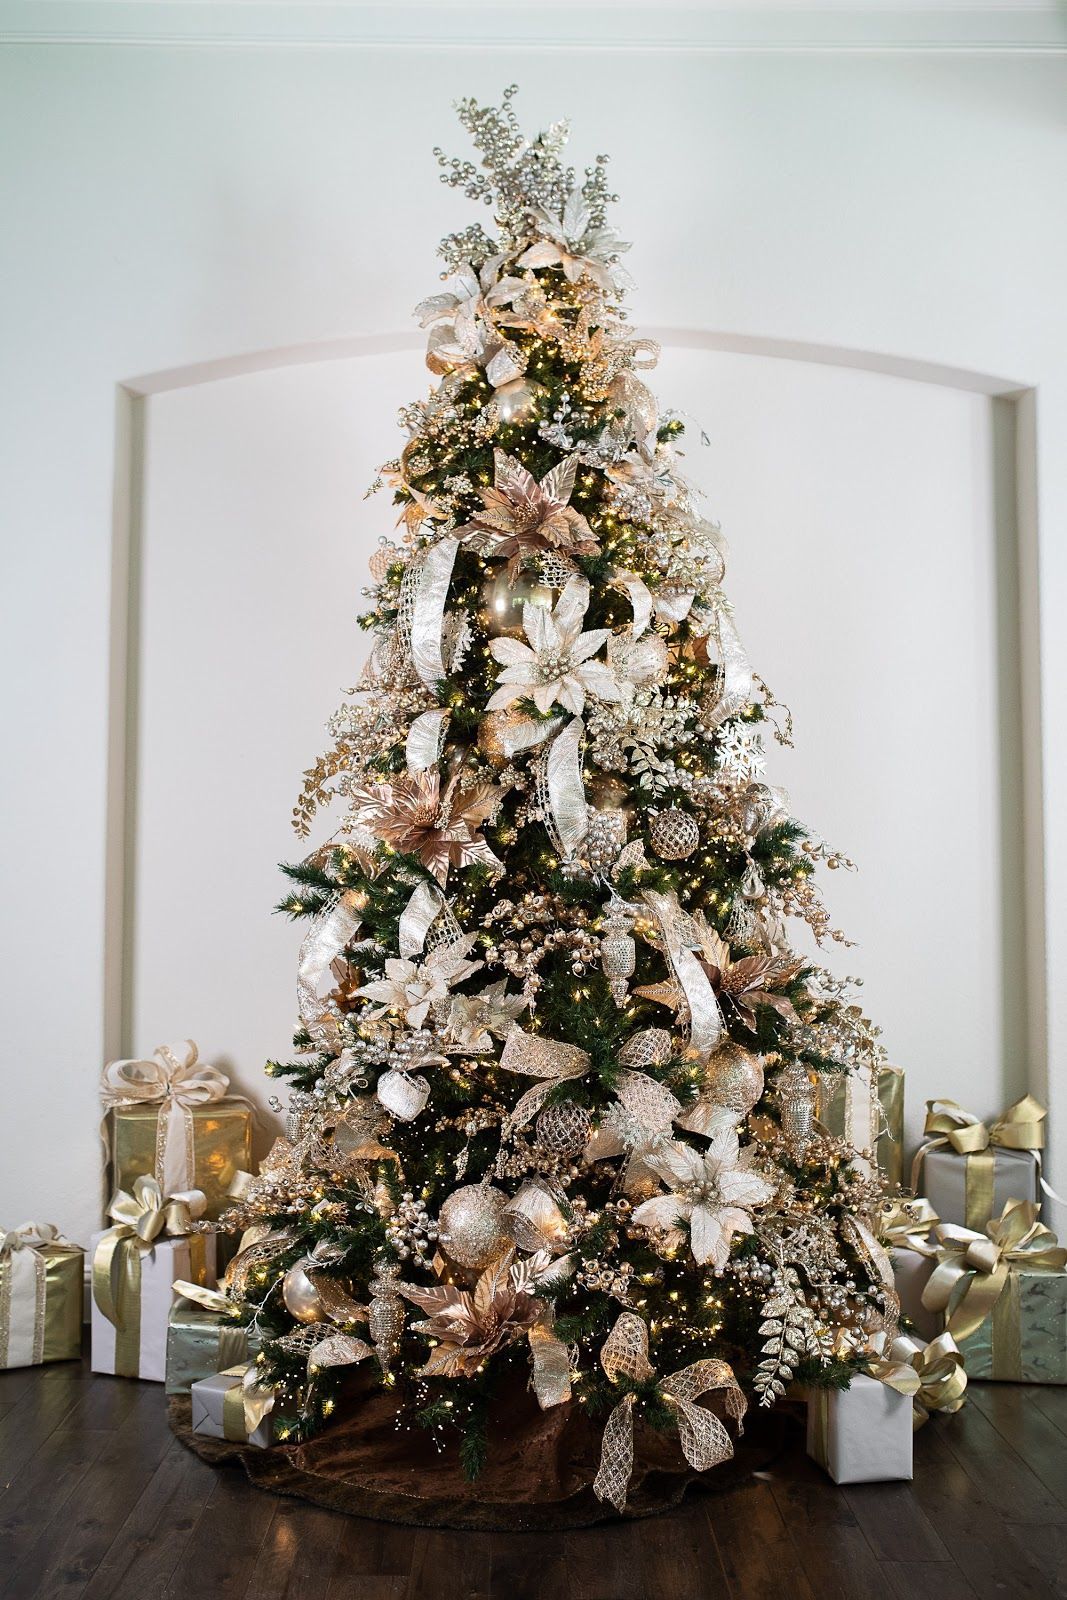 Top Trends in Christmas Home Decor for 2020 -   17 christmas tree decor 2020 gold ideas